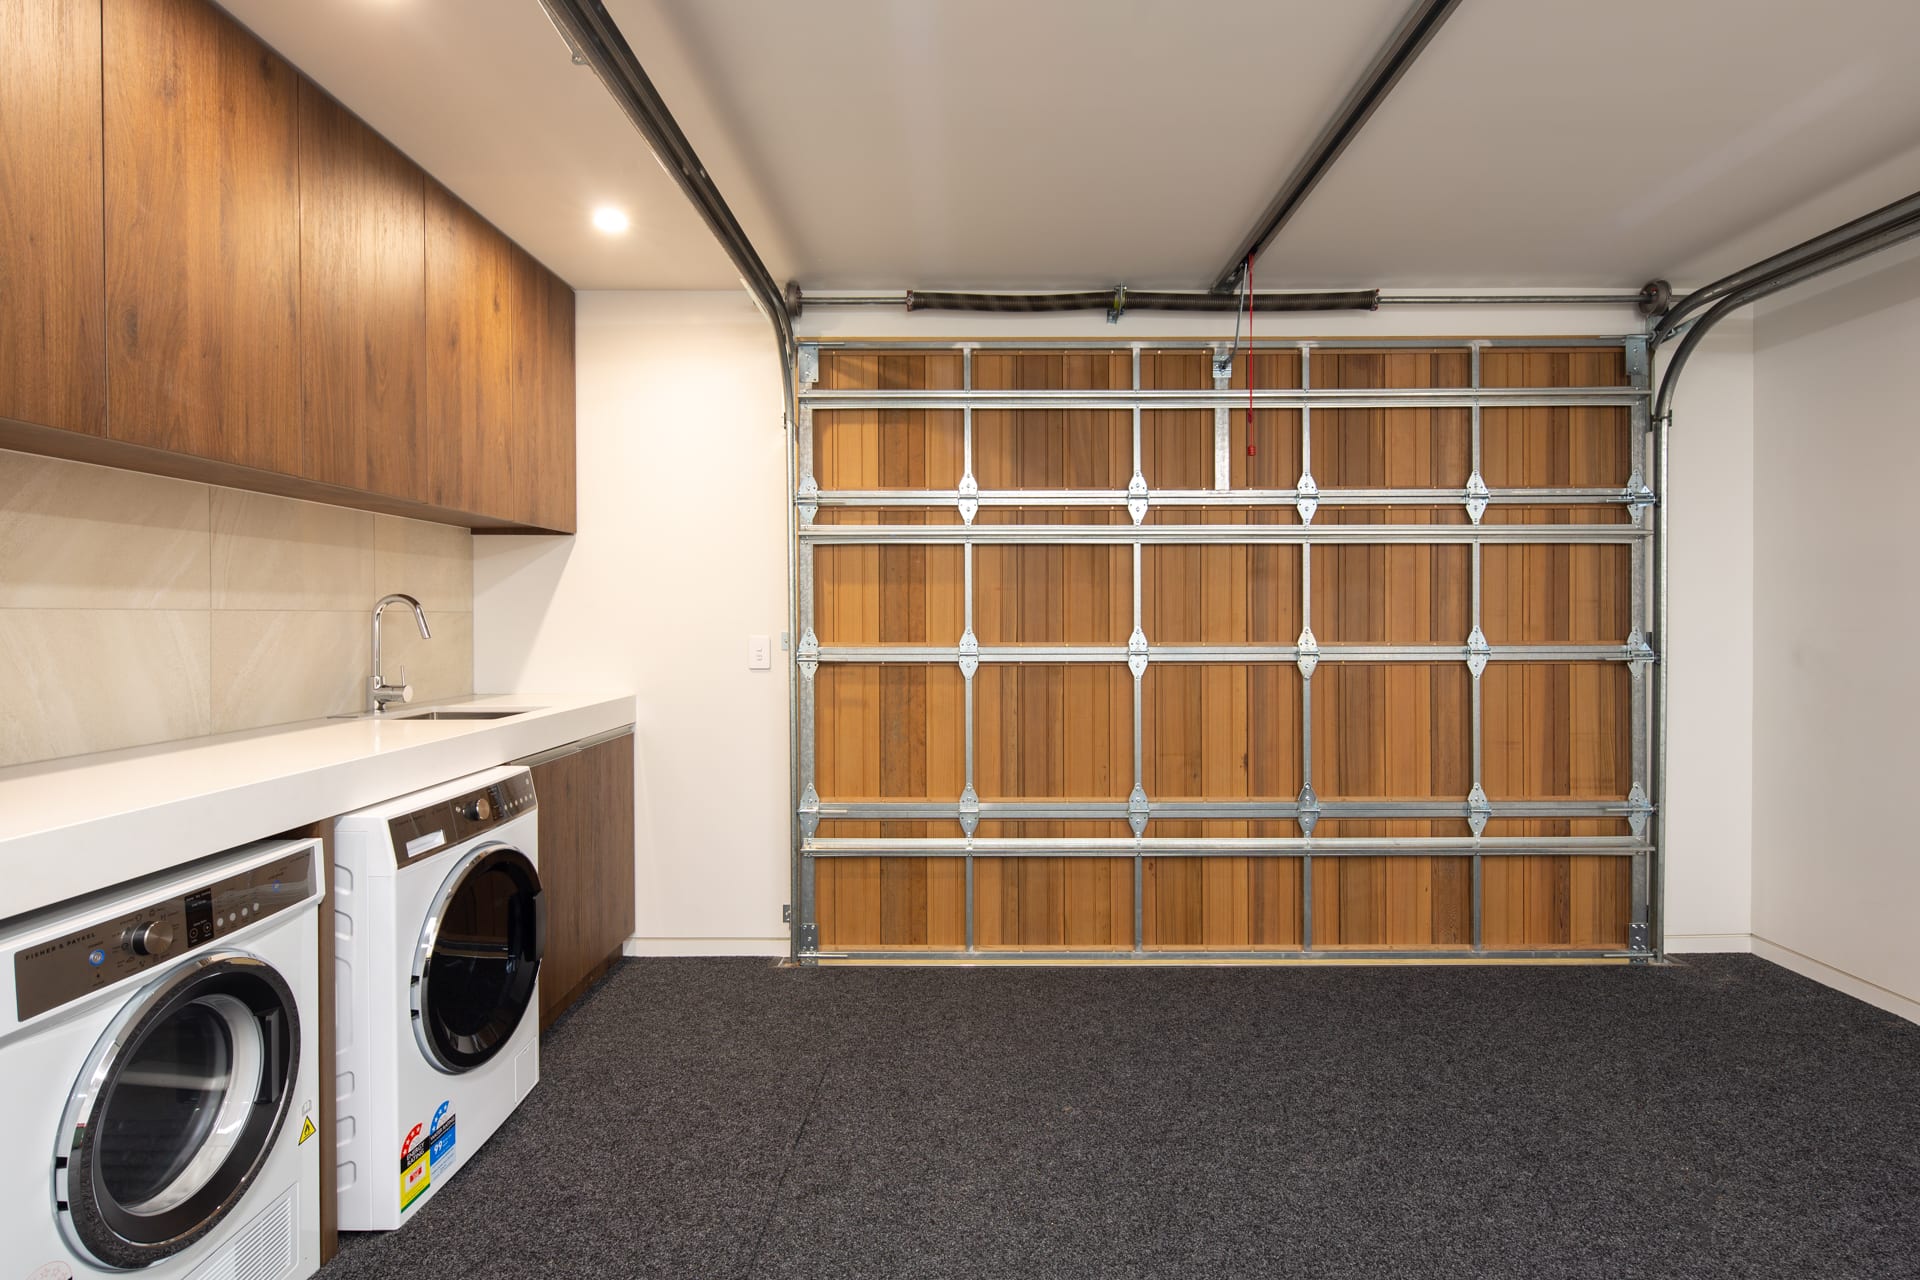 Laundry and garage for storing your toys